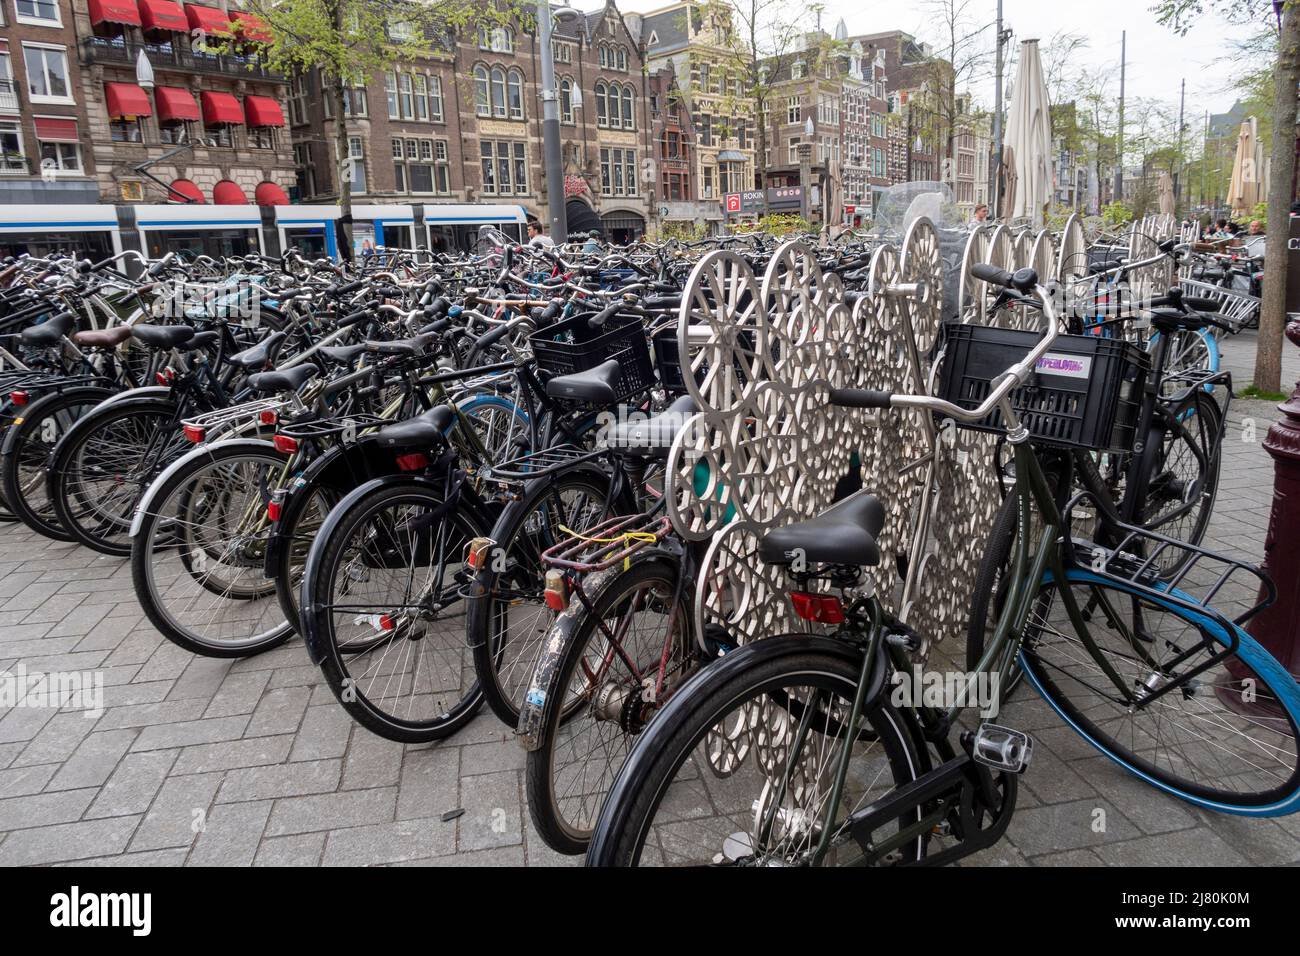 Chaotic bicycle parking in Amsterdam, The Netherlands, Europe Stock Photo